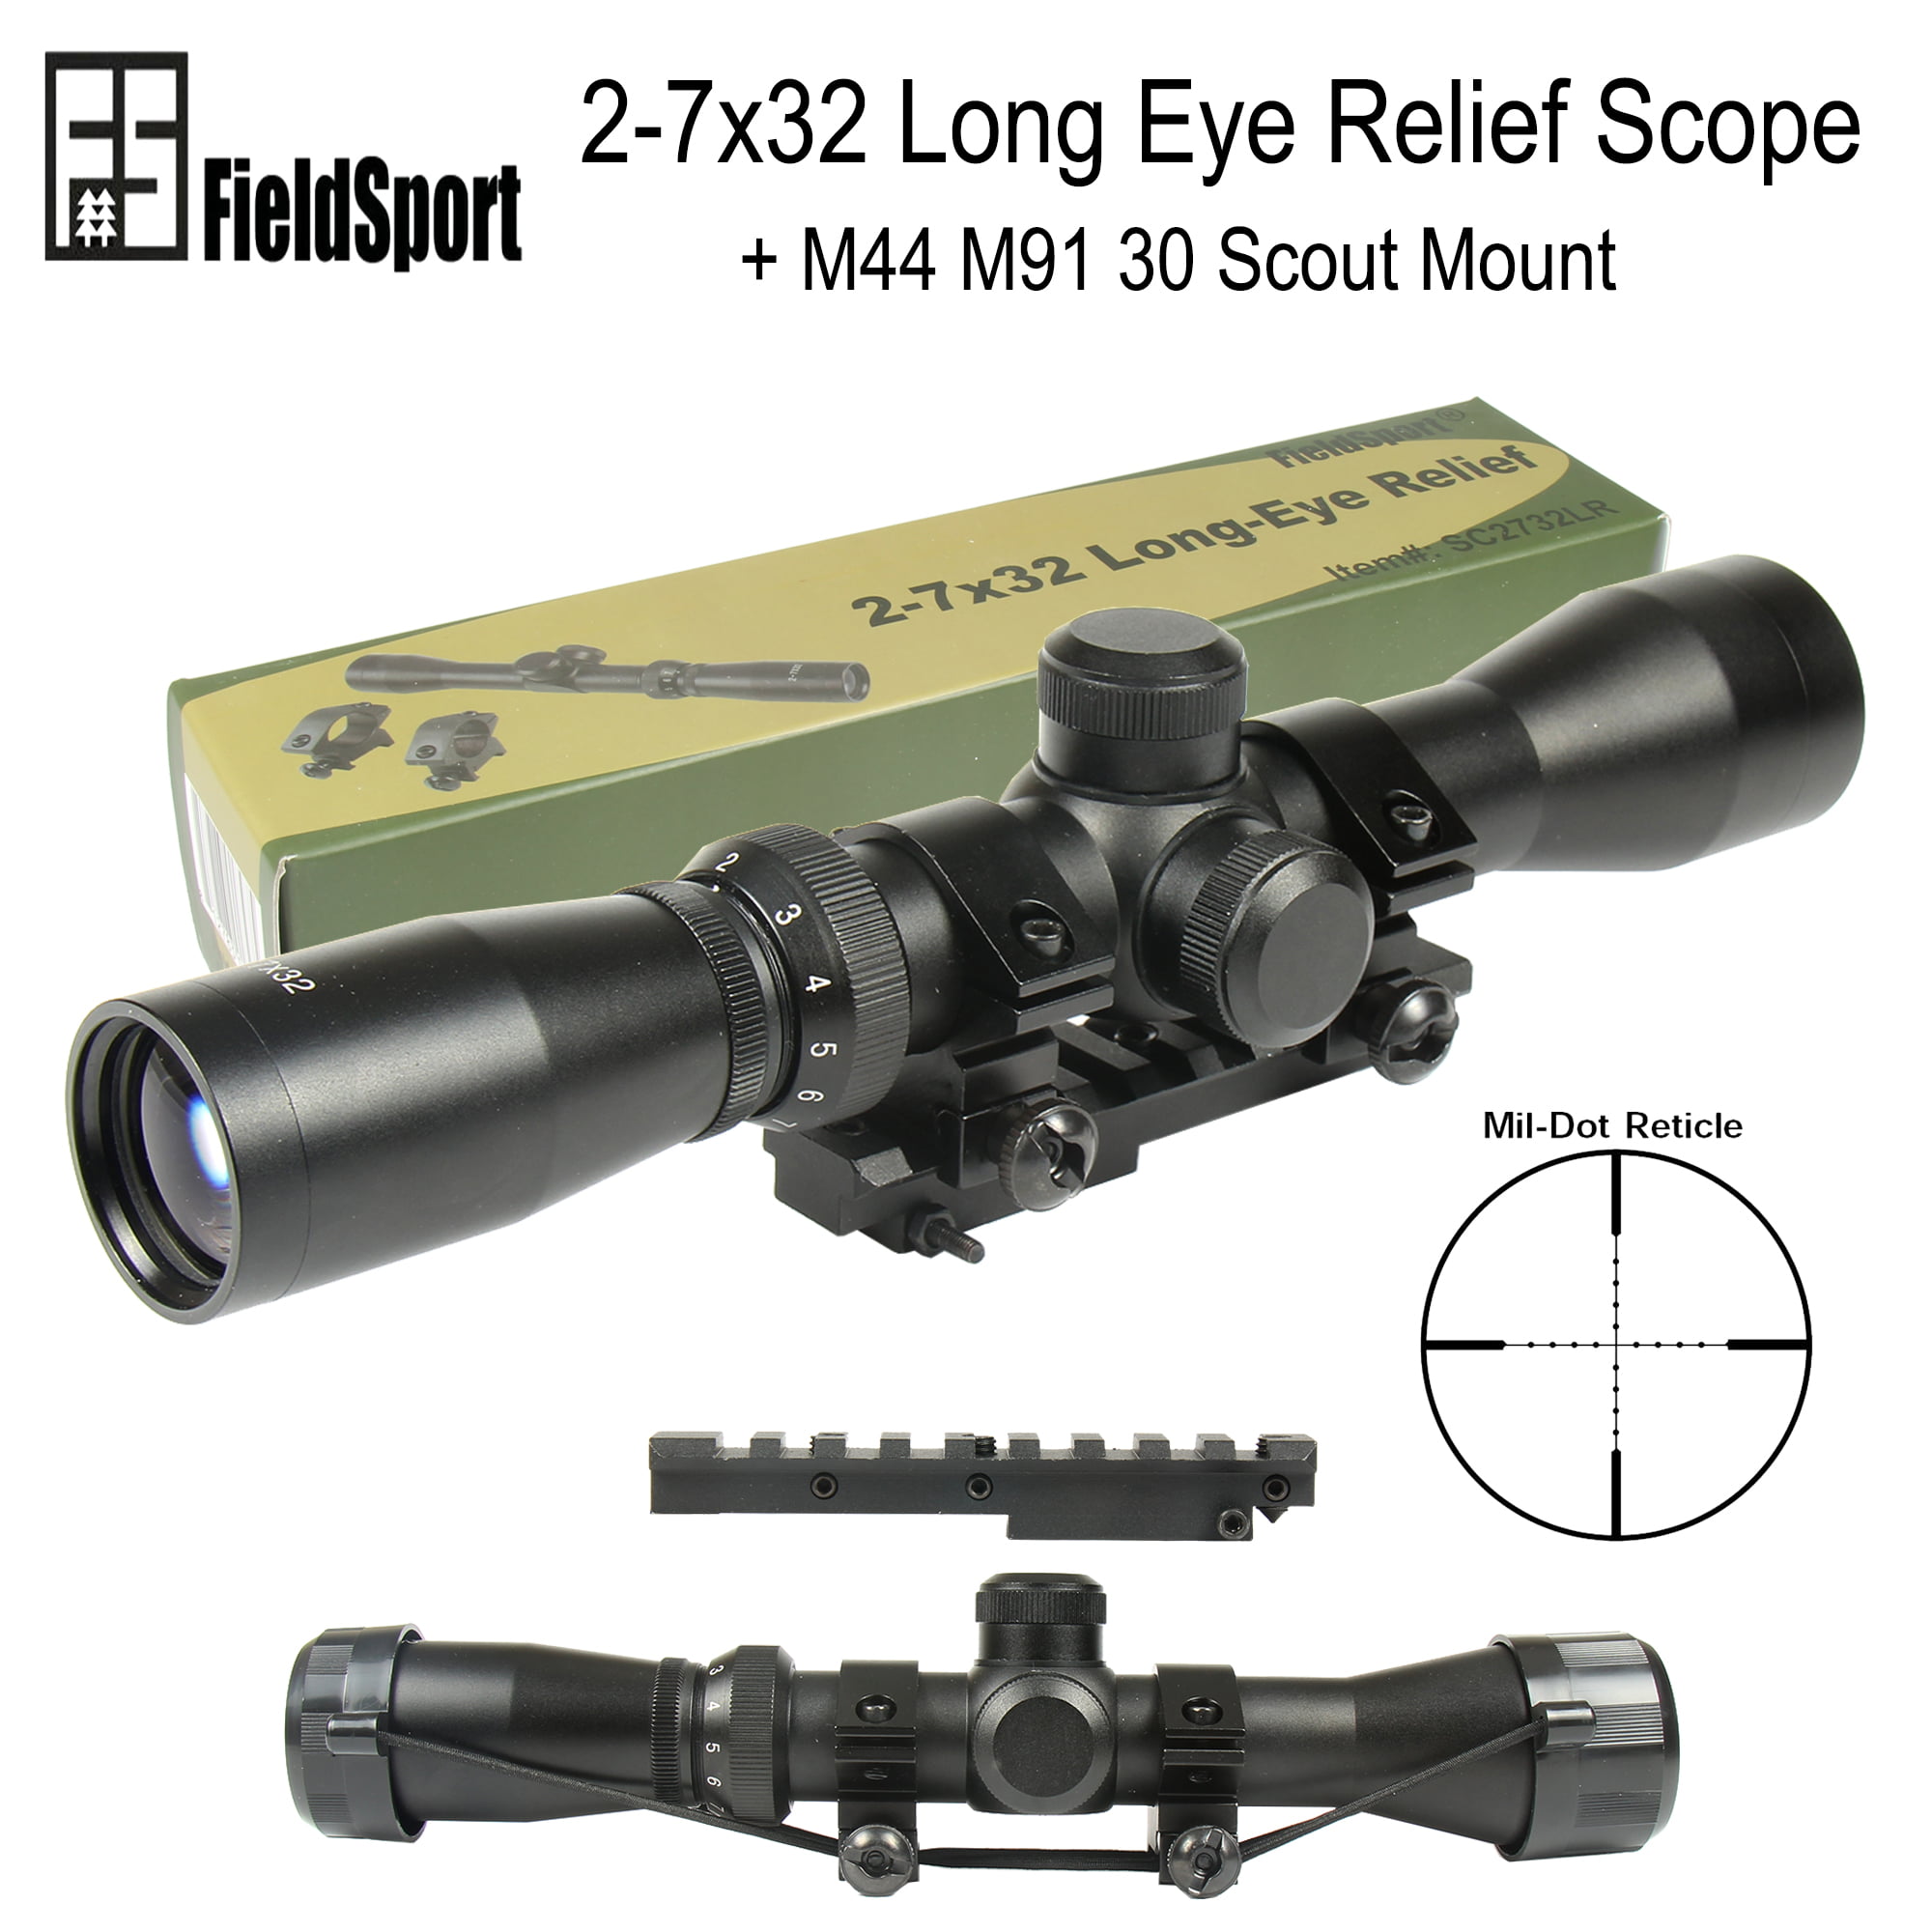 Mosin Nagant 2-7x32 Long Eye Relief Scope with M91 M44 Short Scope Mount Combo 